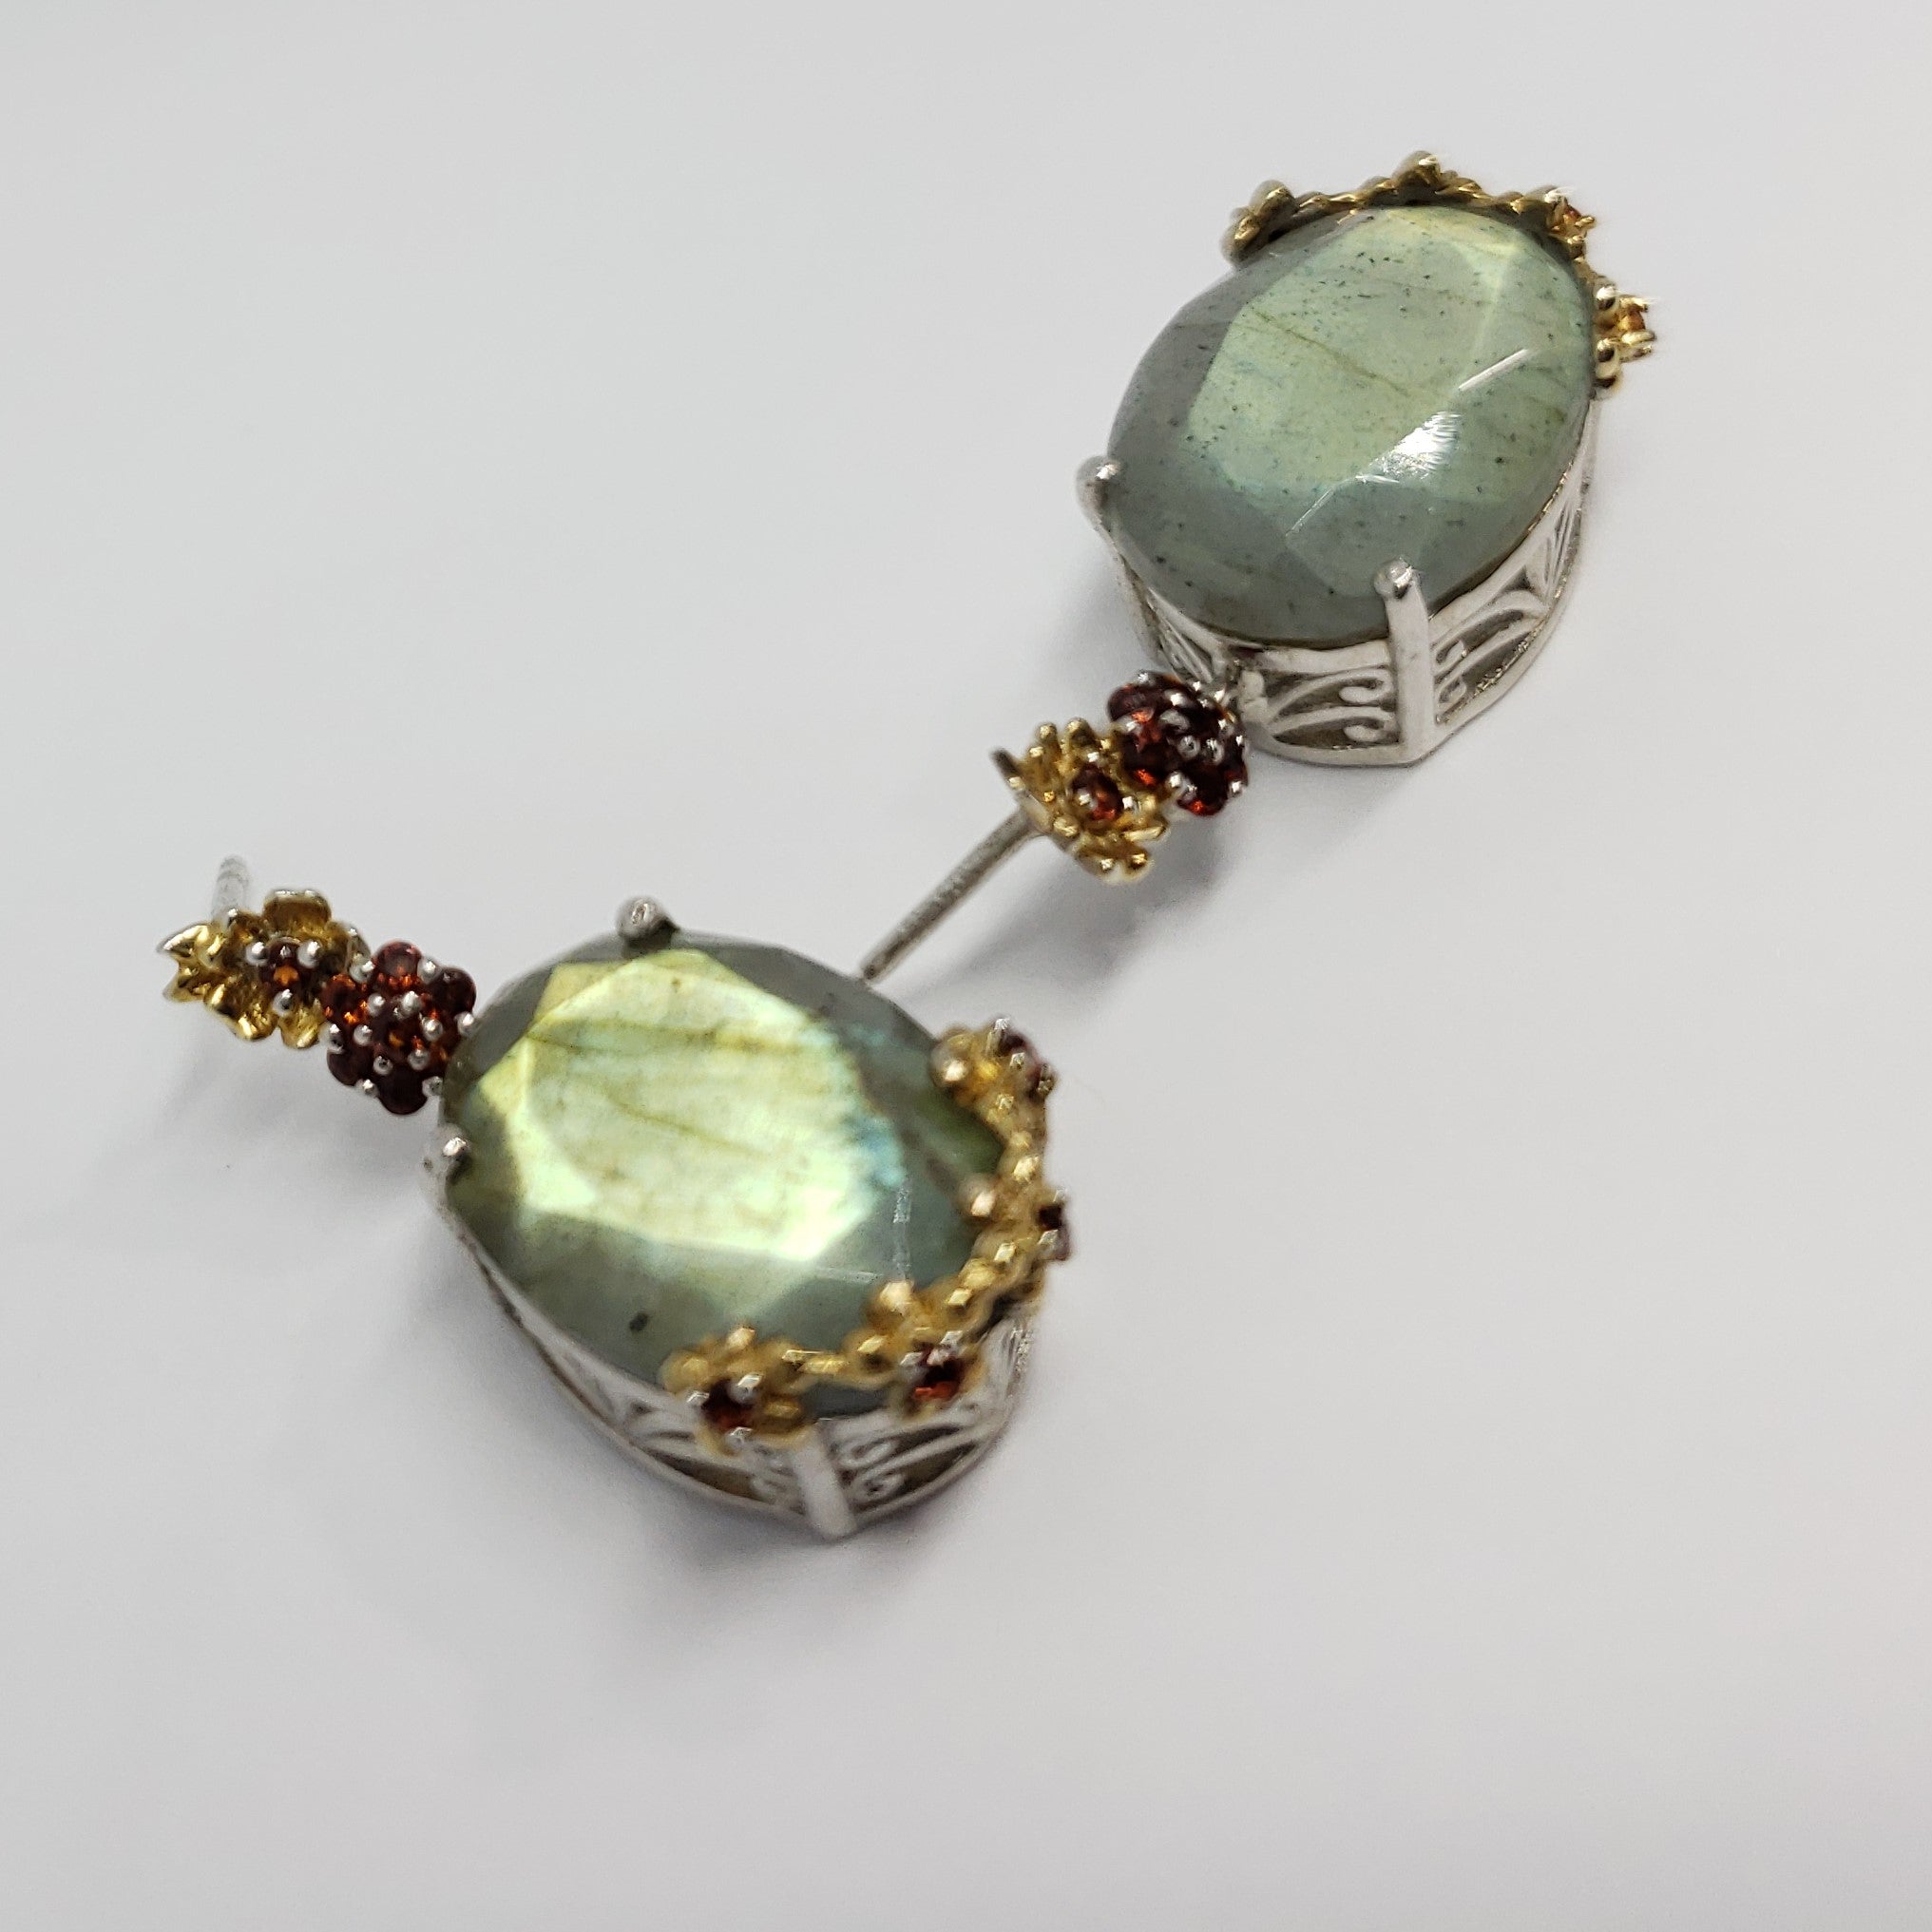 Malagasy Labradorite, Mozambique Garnet 14K YG and Platinum Over Sterling Silver Dangle Earrings TGW 8.925 cts. - Houzz of DVA Boutique